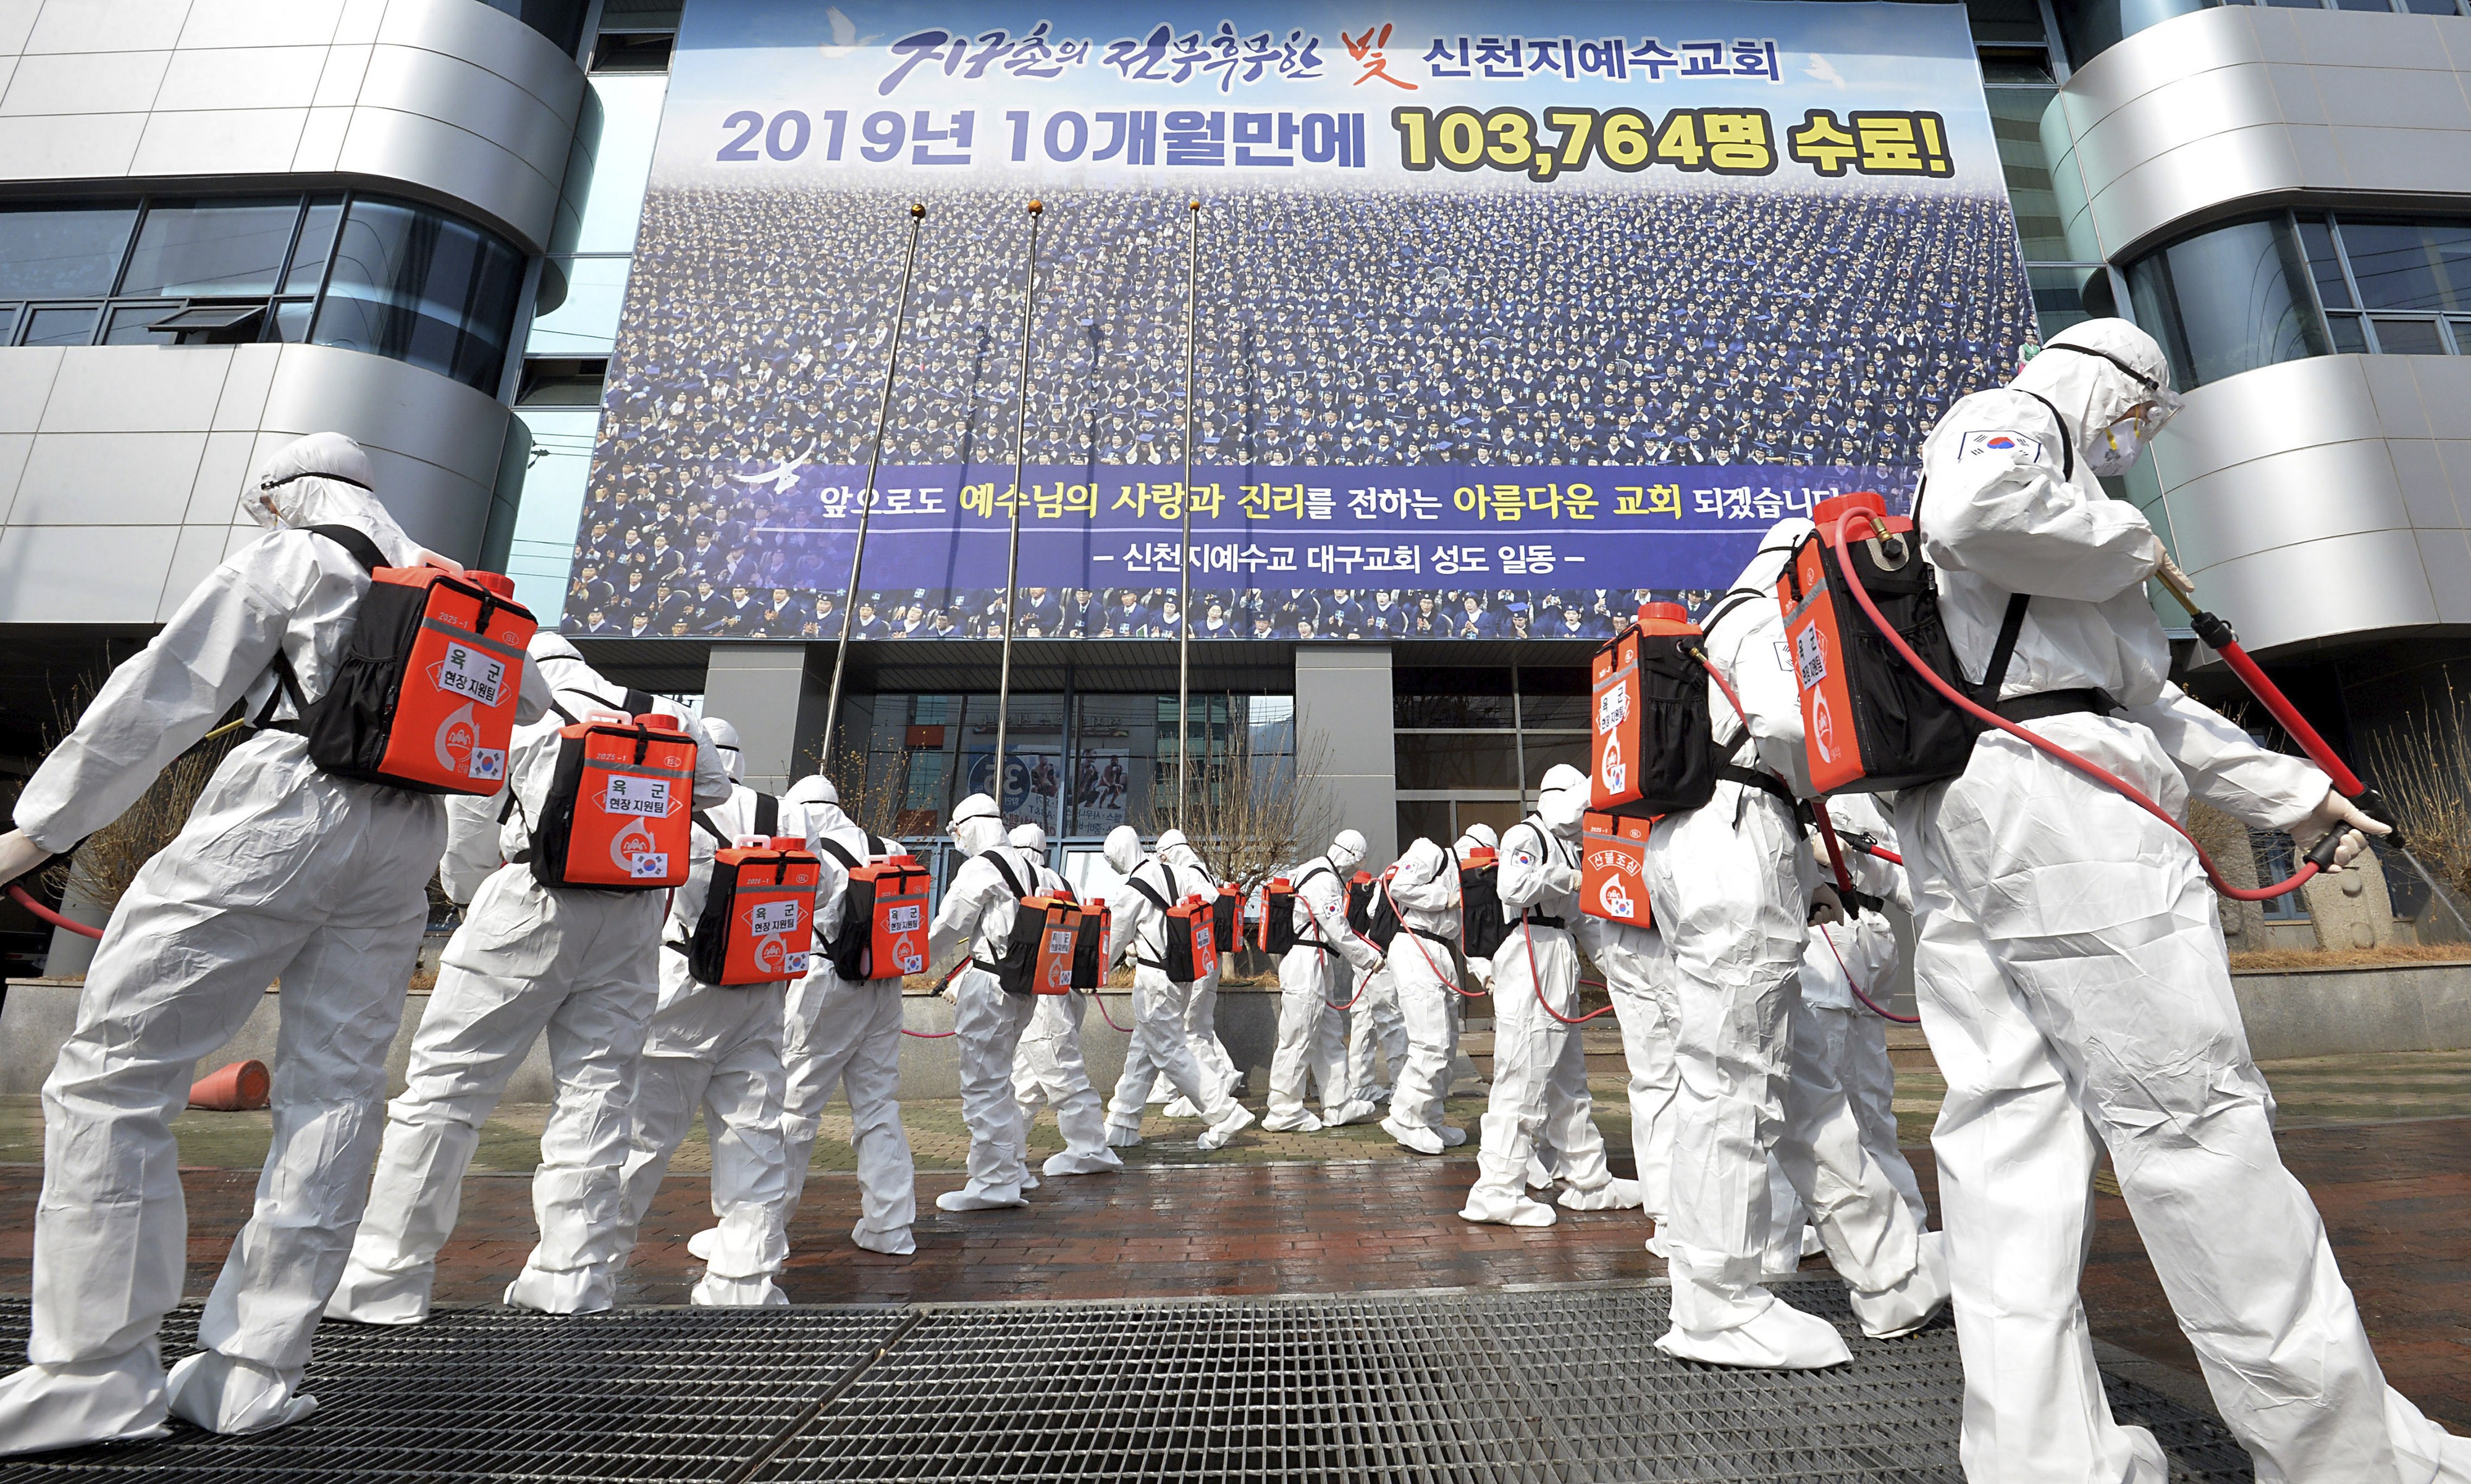 Soldiers in protective suits disinfect the area outside a Shincheonji church in Daegu, South Korea, on March 1, as Covid-19 cases outside China surge. Photo: AP